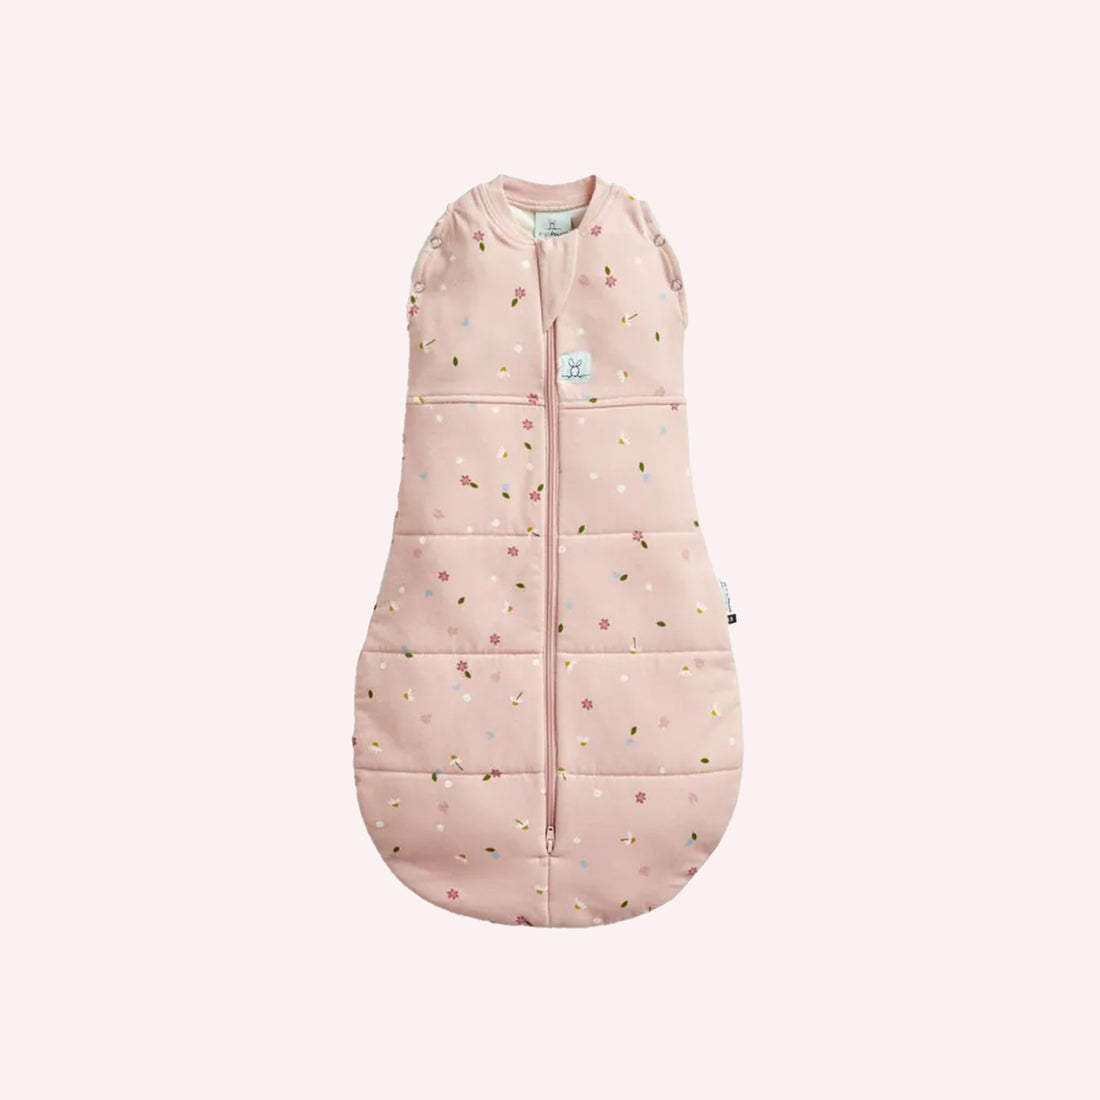 Cocoon Swaddle Bag 2.5 TOG - Daisies